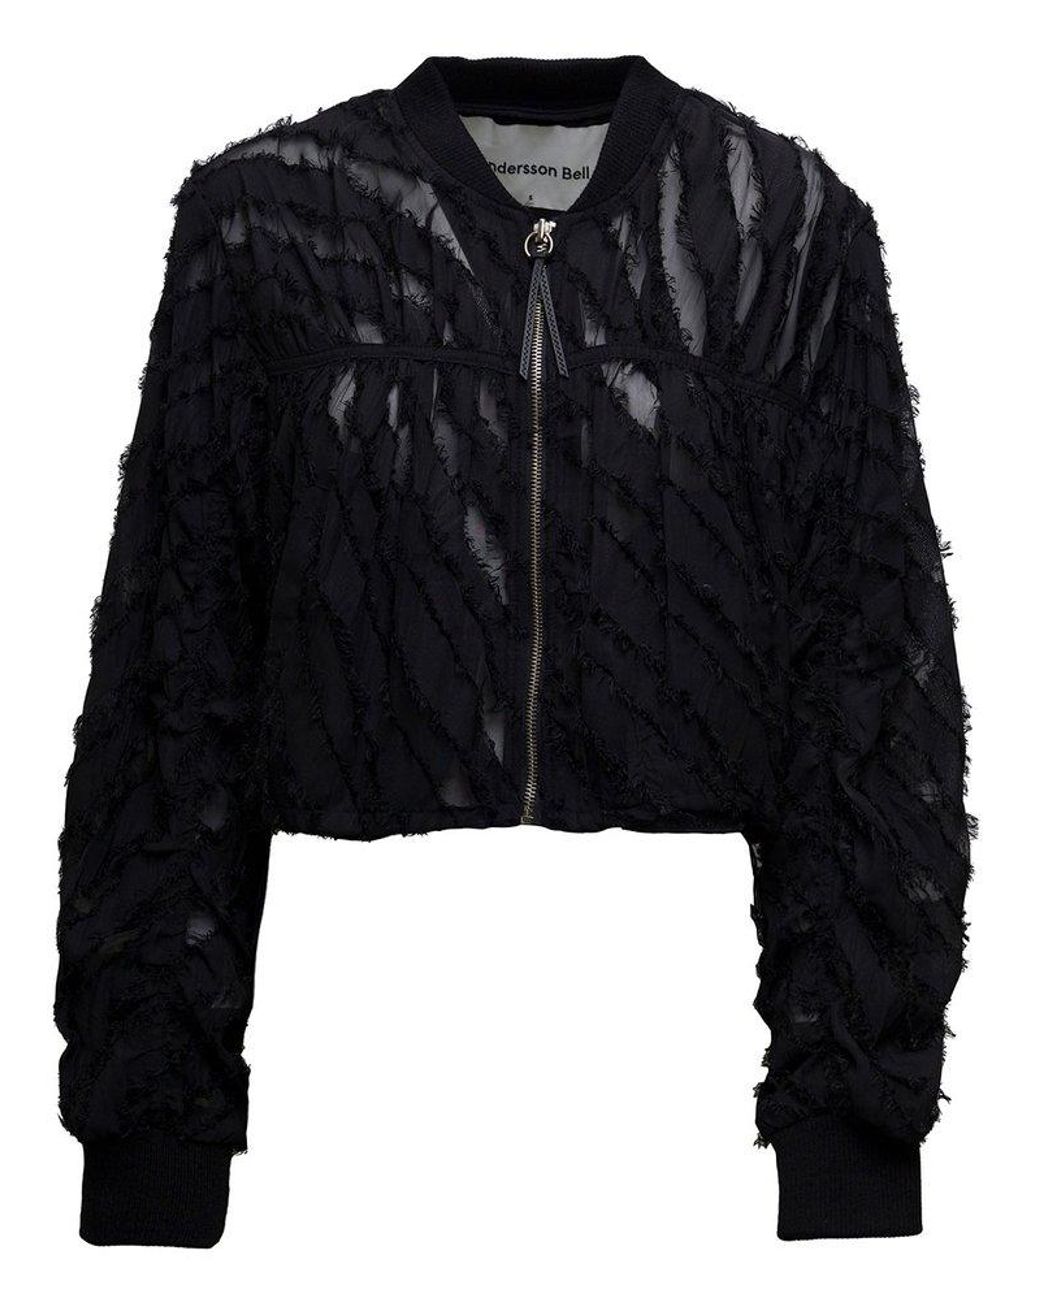 ANDERSSON BELL Adia See-through Fringe Bomber Jacket in Black | Lyst